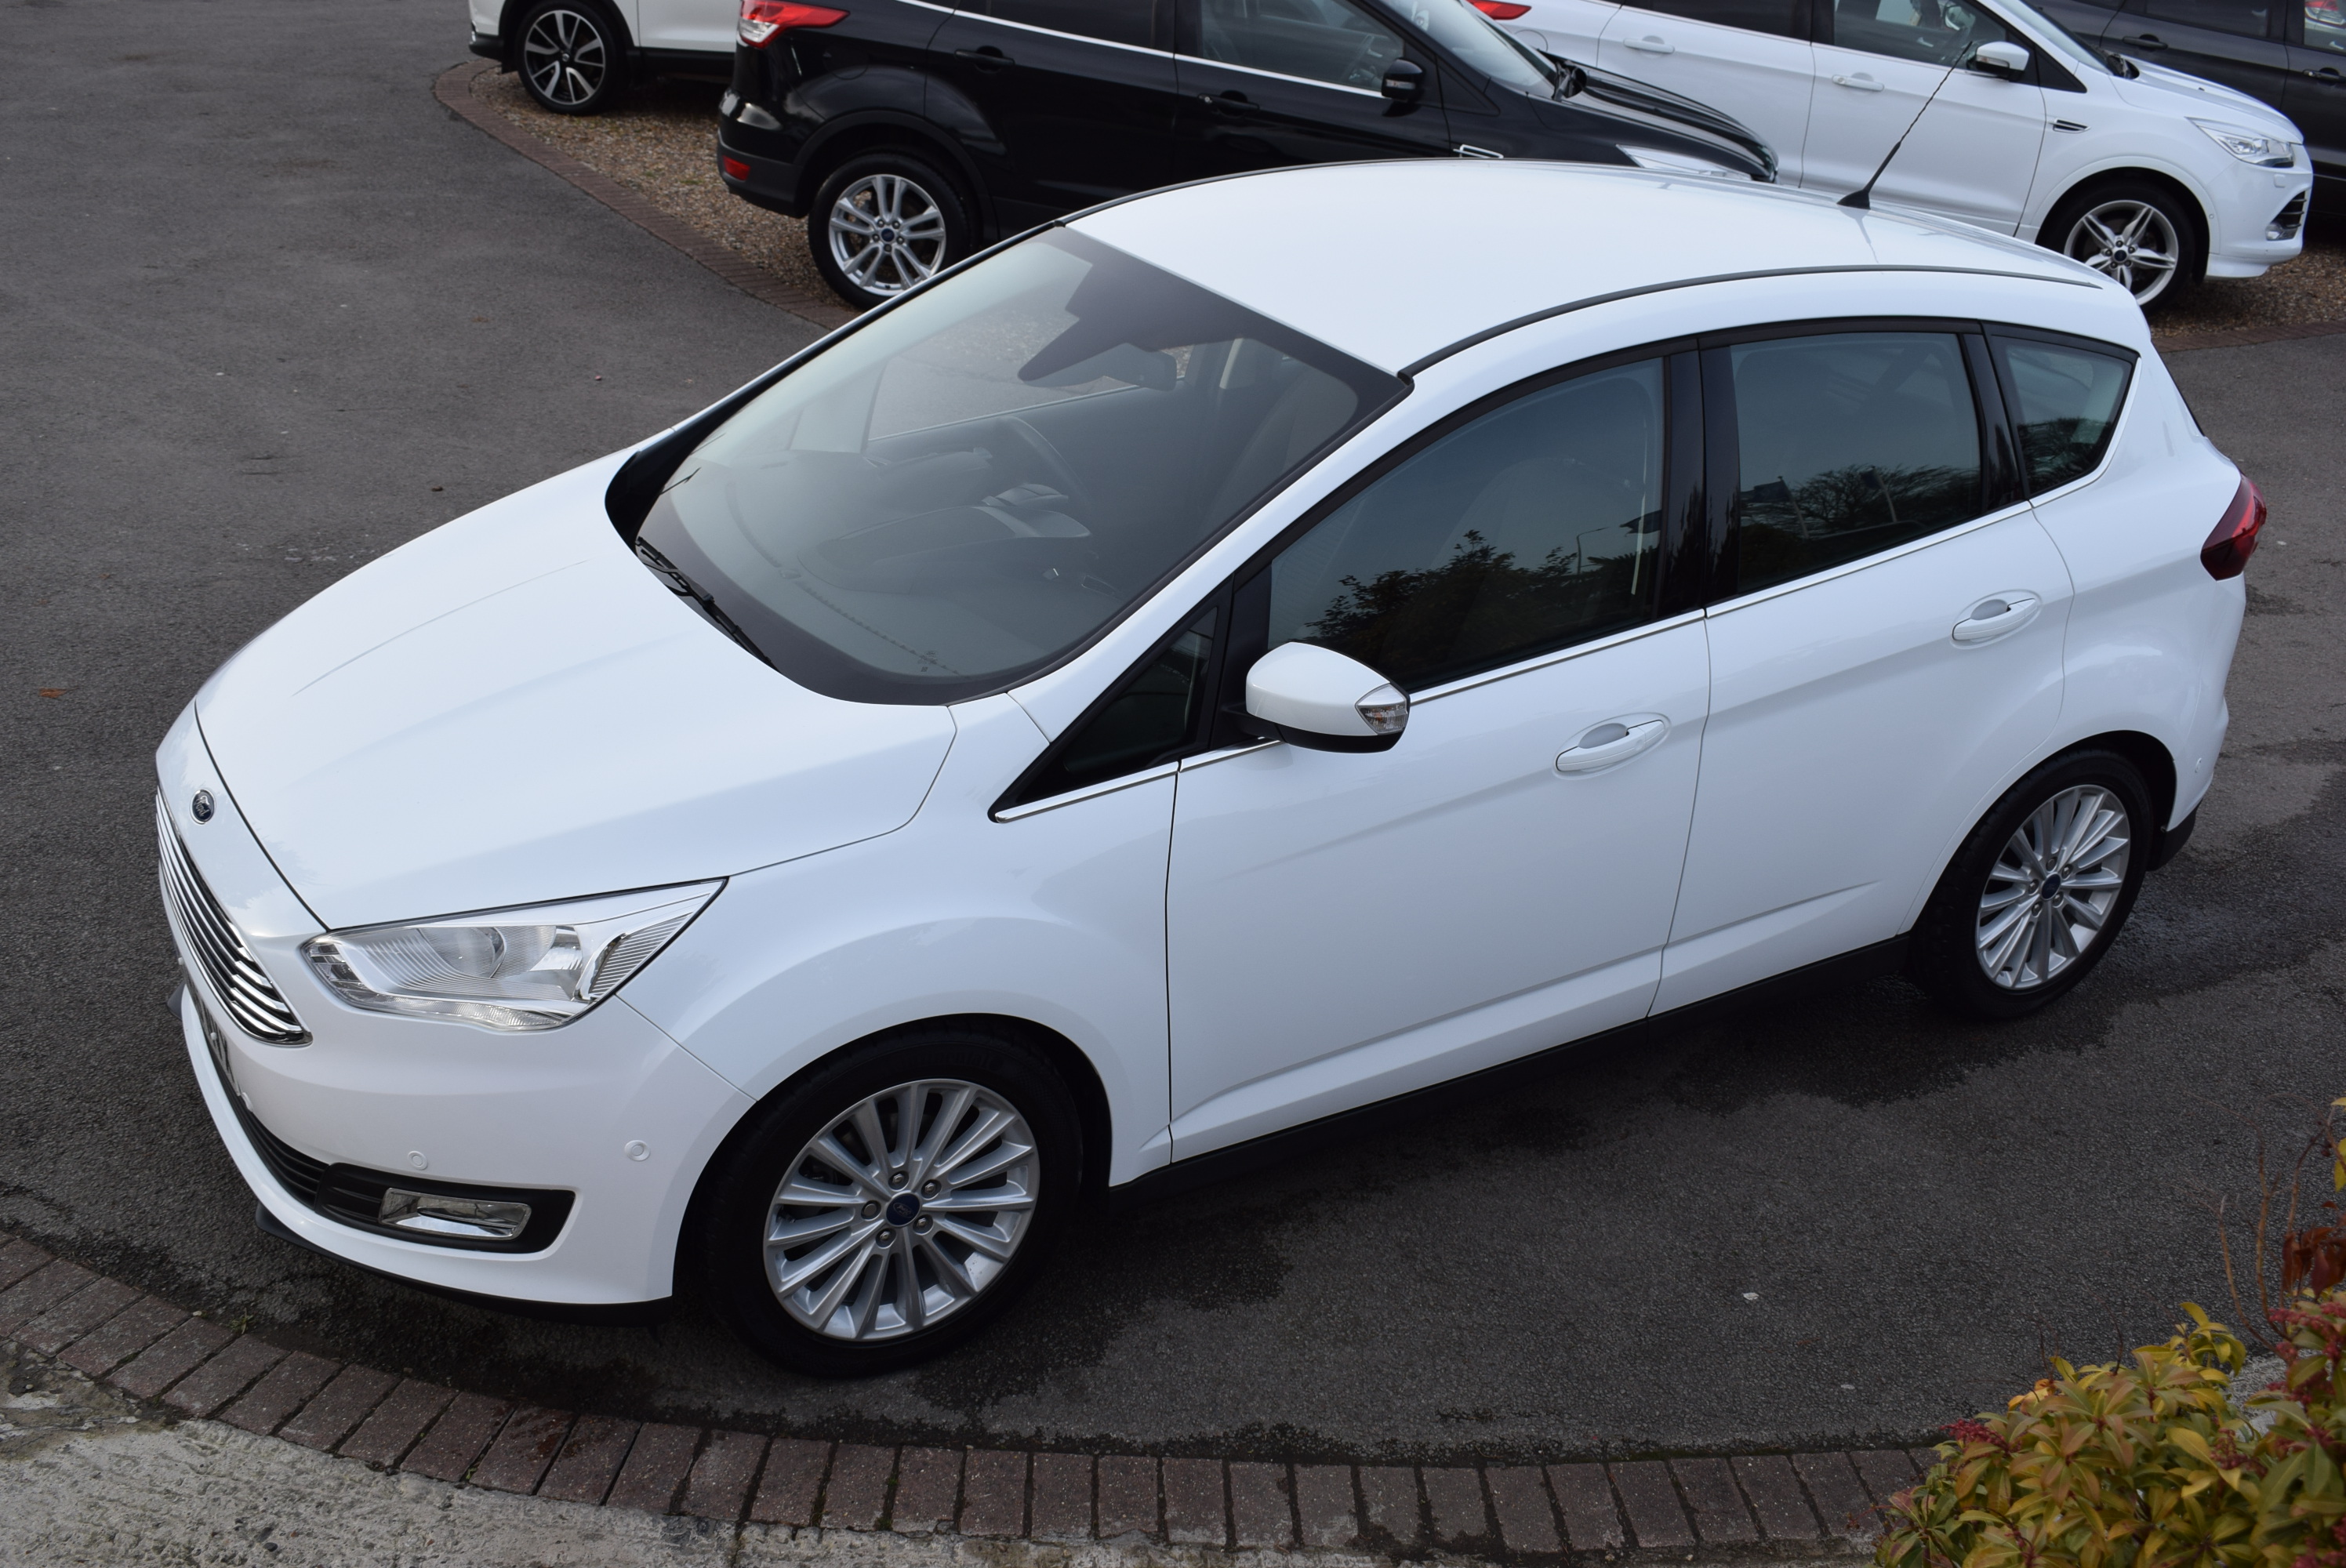 FORD CMAX 1.5 TDCi Titanium 5dr For Sale Richlee Motor